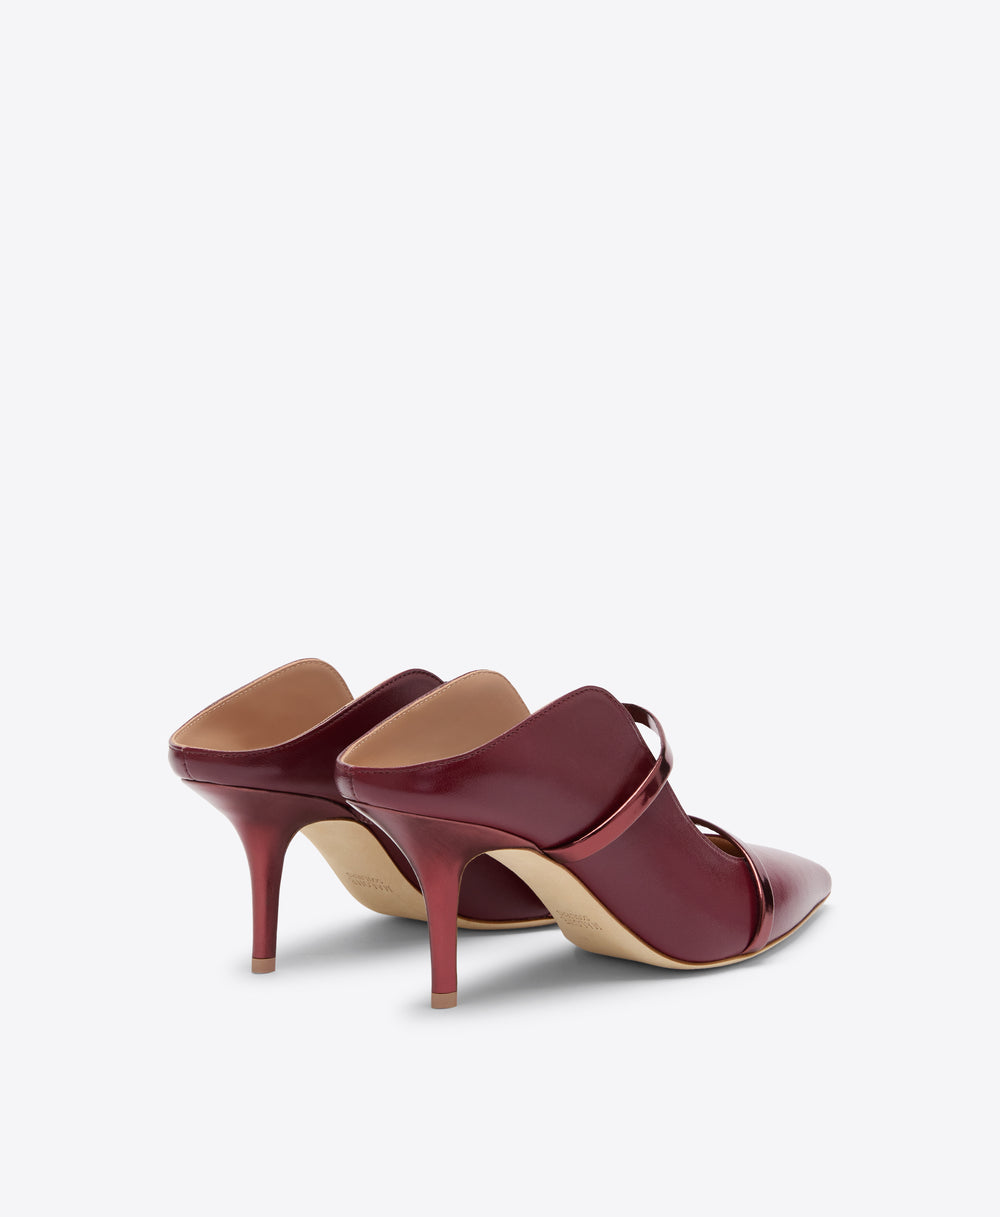 Maureen 70 Rosewood Leather Mules with Straps Malone Souliers